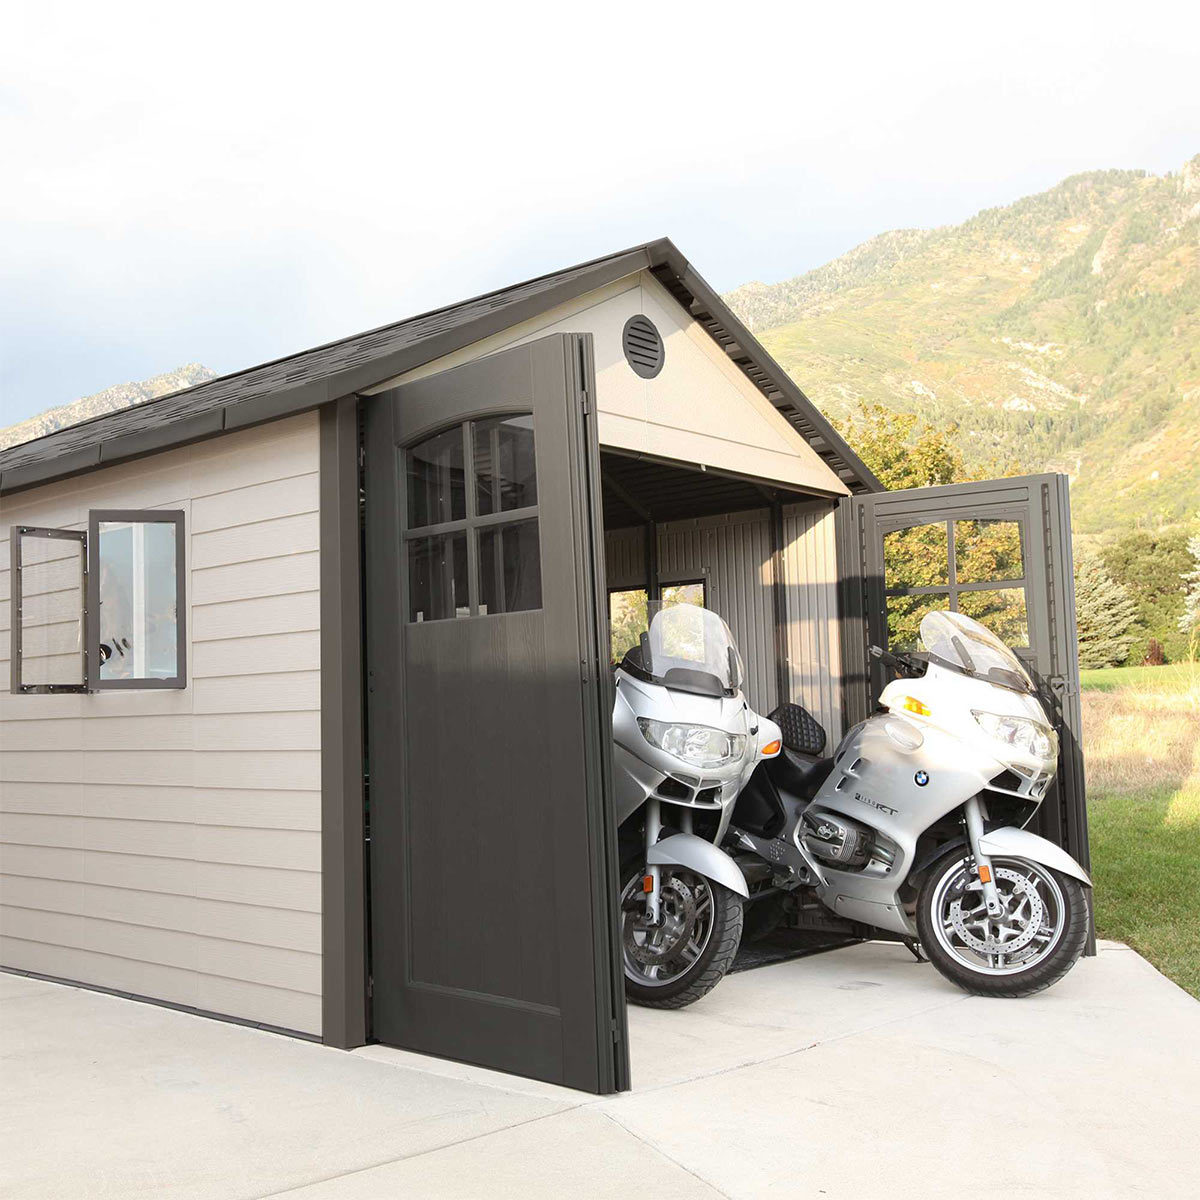 Steel reinforced doors with extra-large opening Lifetime Garden Storage Shed